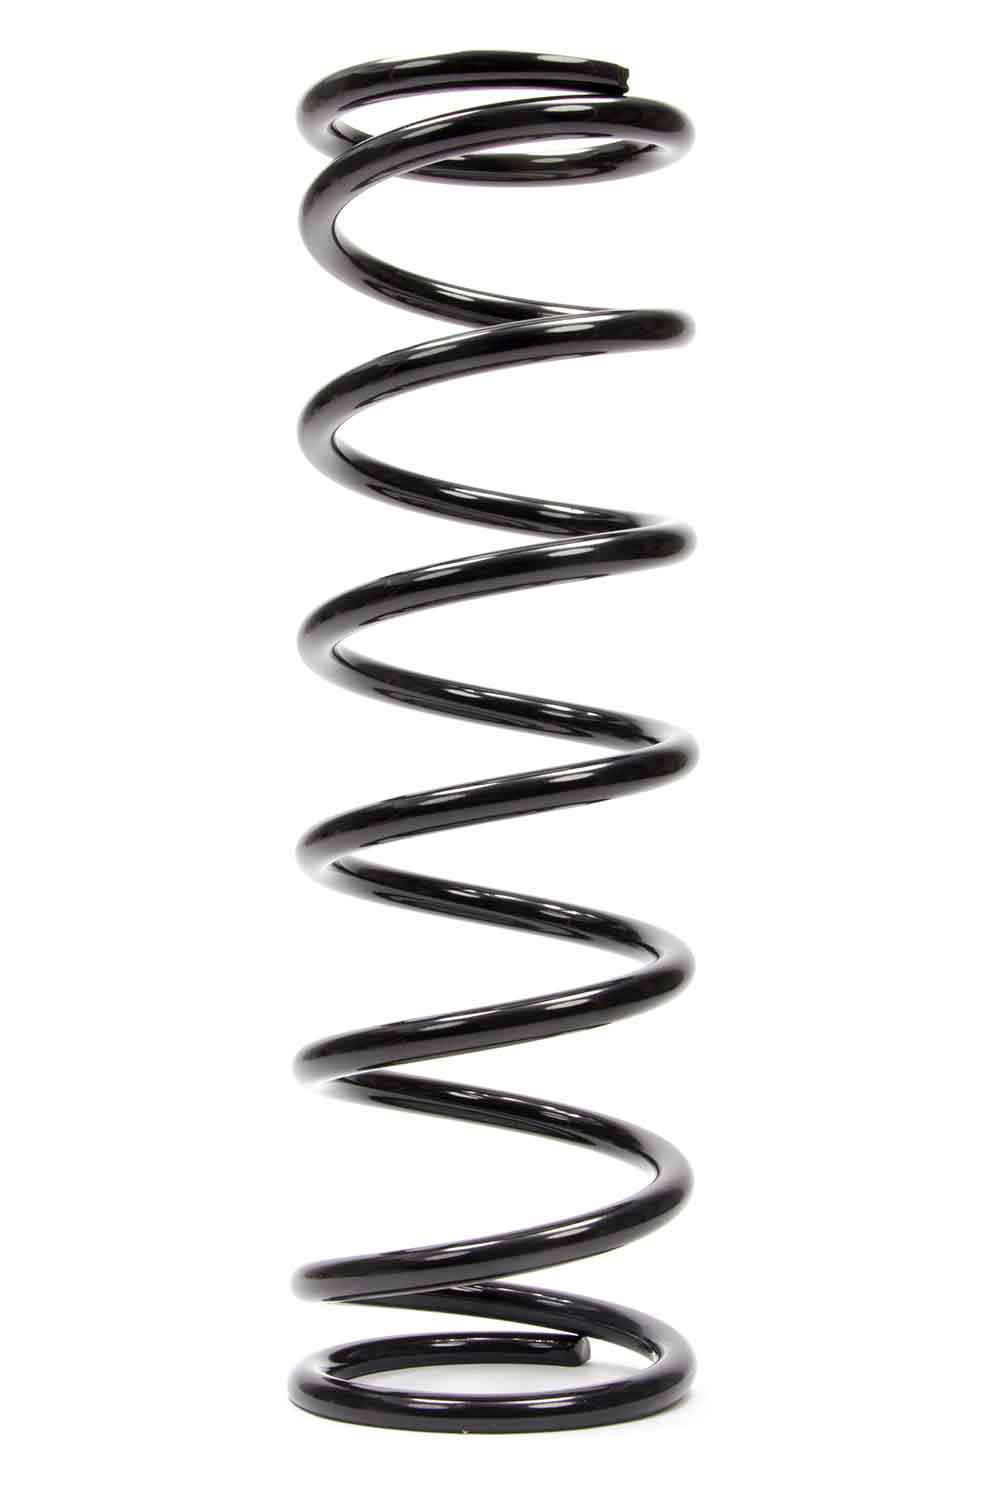 Conv Rear Spring 5in x 16in x 200 - Burlile Performance Products